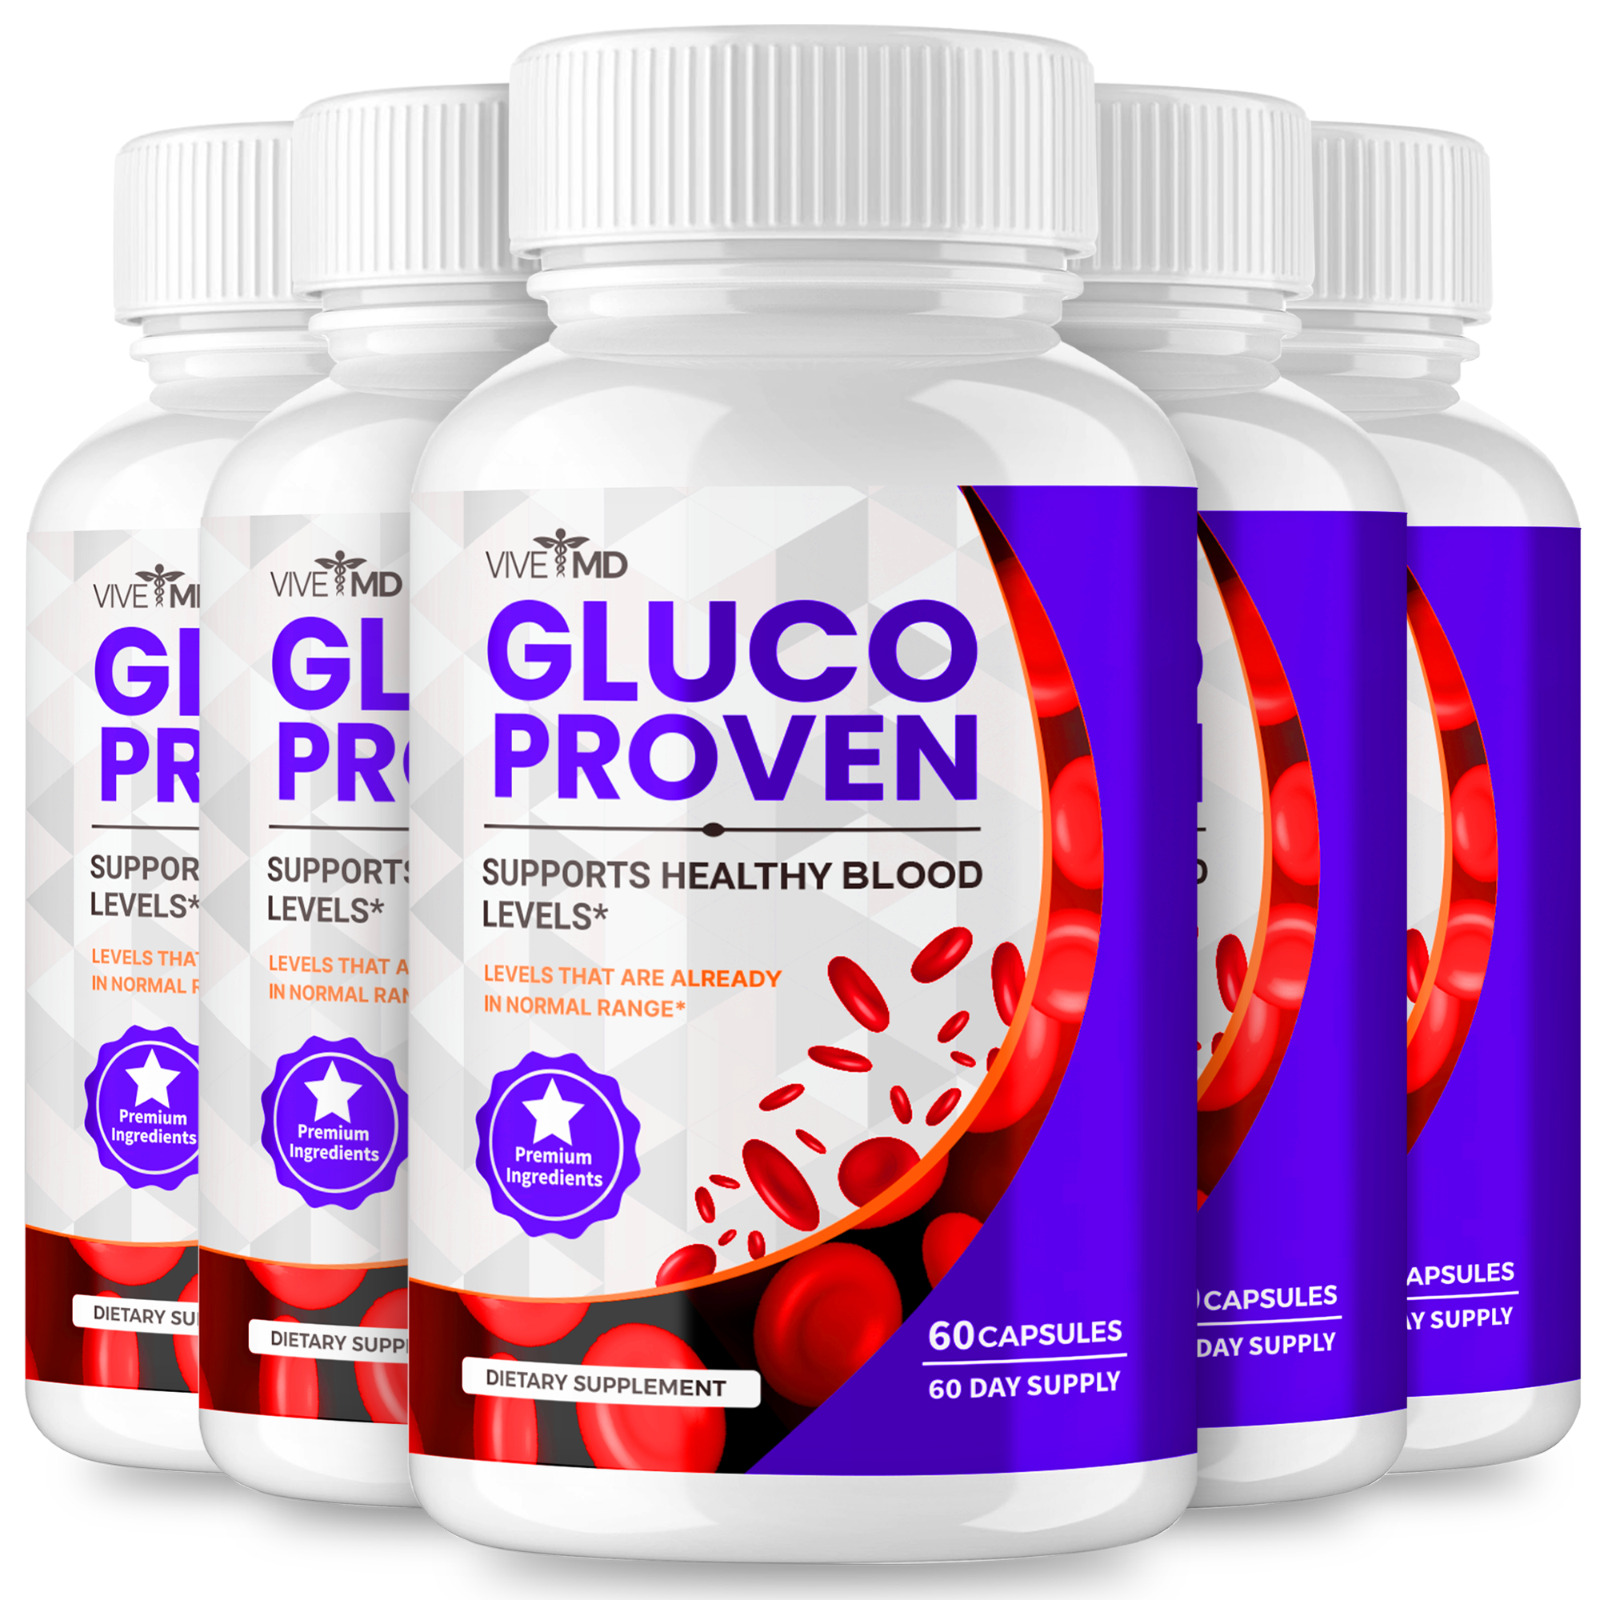 Gluco Proven Capsules Advanced Dietary Supplement Official Formula (5 Pack)